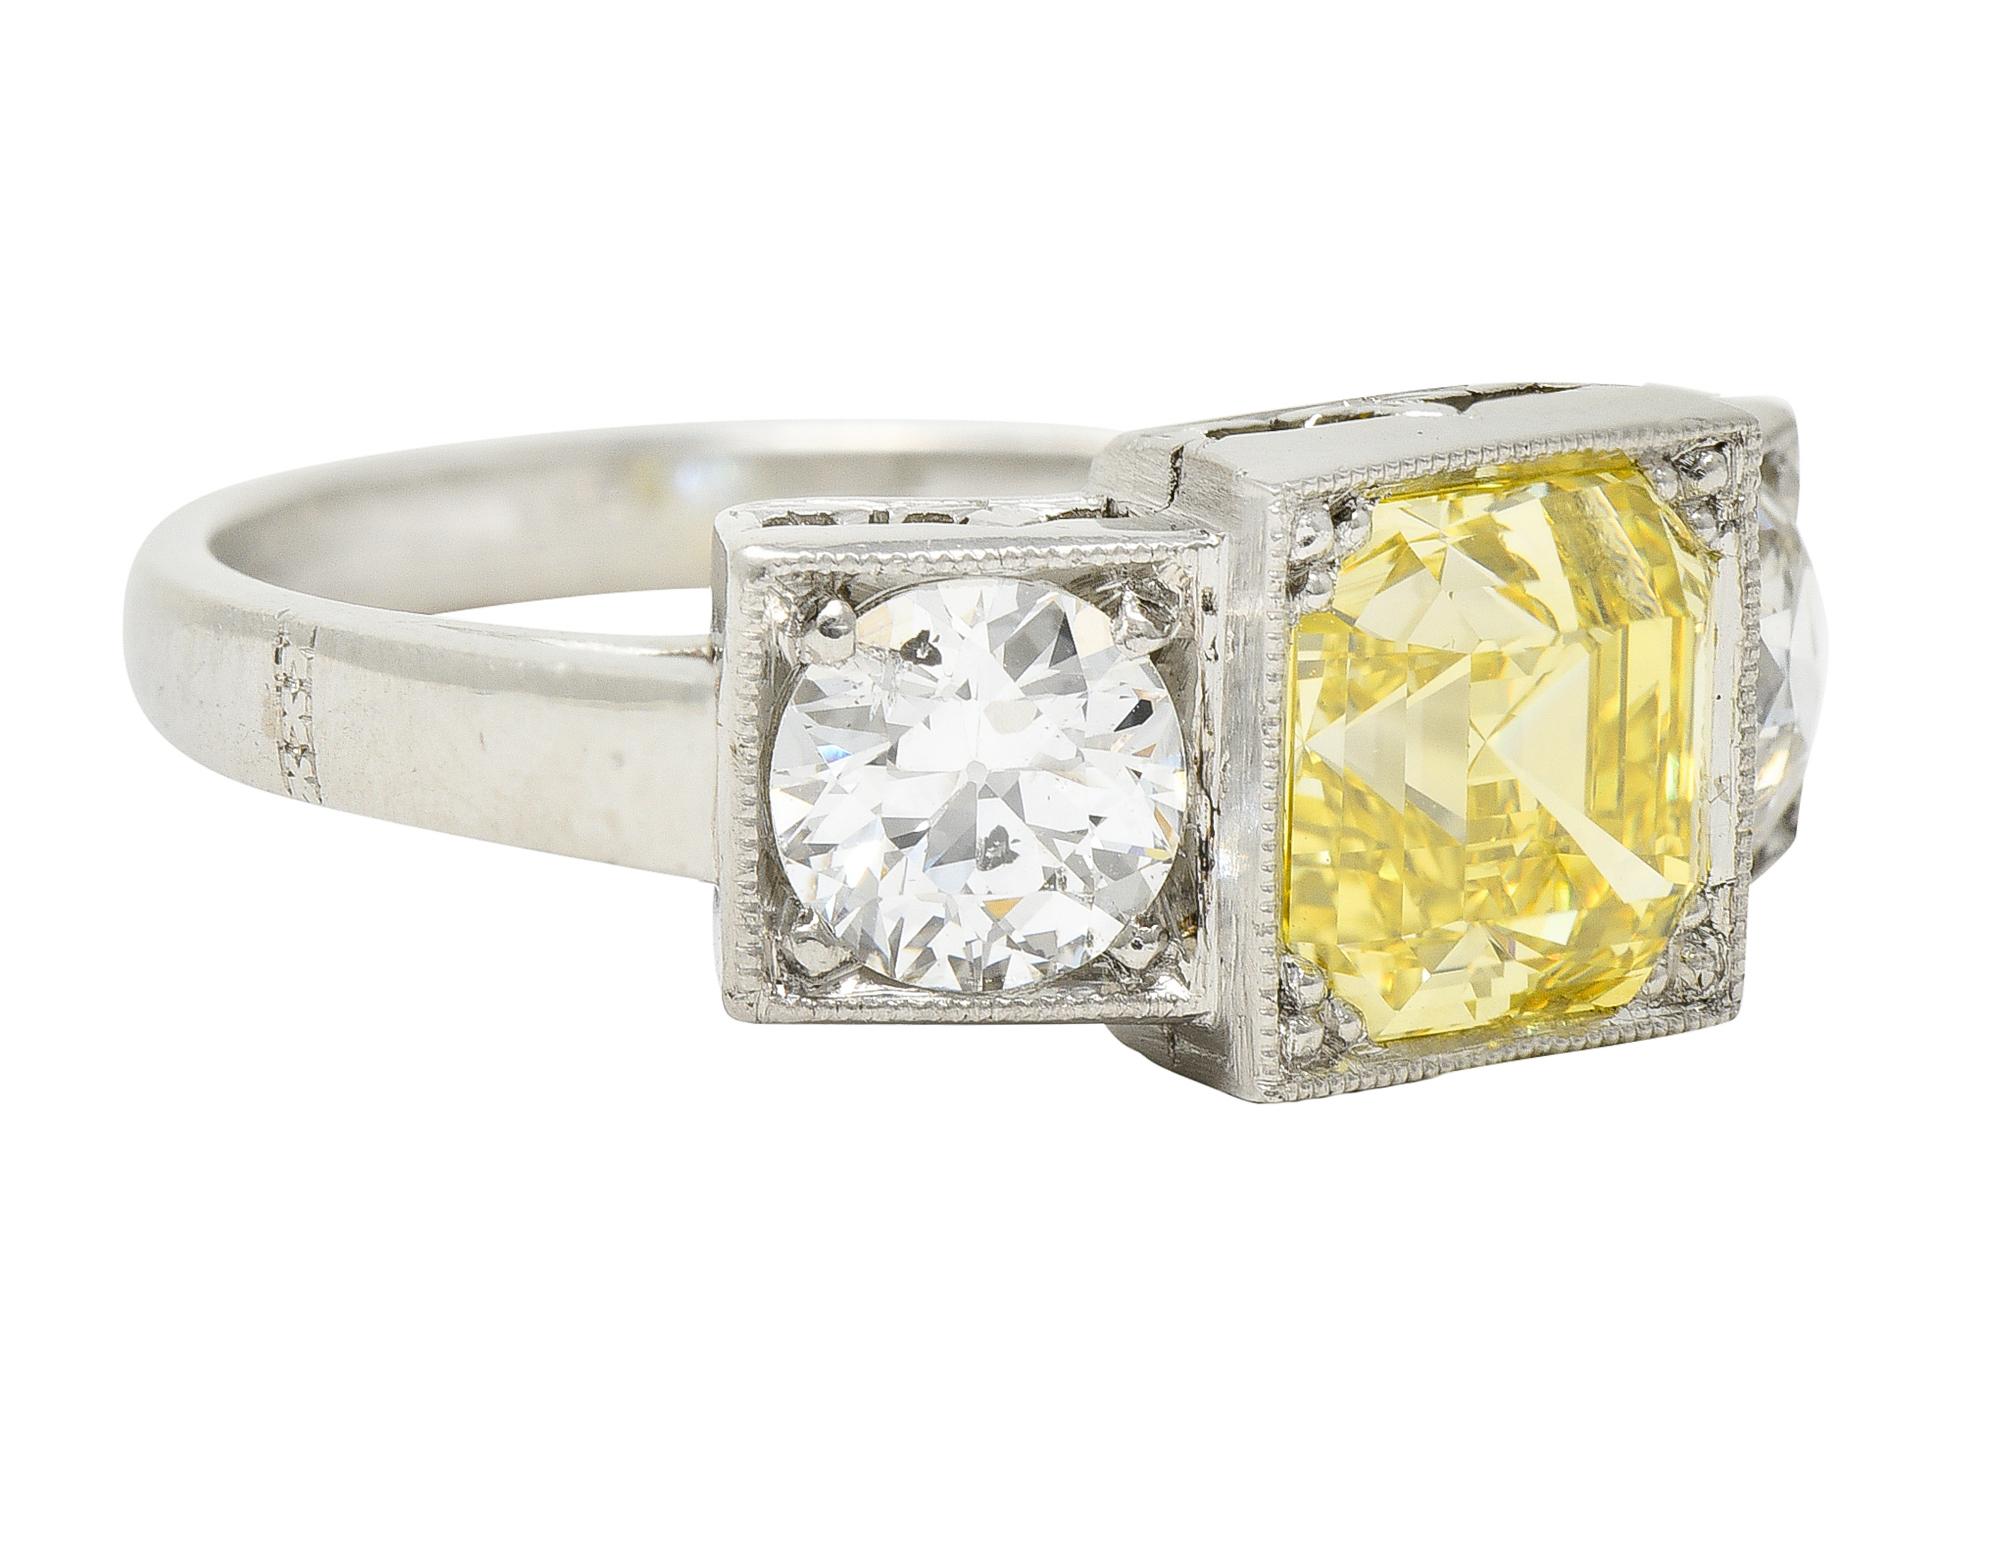 Centering an asscher cut diamond weighing 2.04 carats - Natural Fancy Intense Yellow in color with VS1 clarity. Set with tri-beads in a square from head and flanked by two old European cut diamonds. Weighing approximately 1.16 carats total - H and I